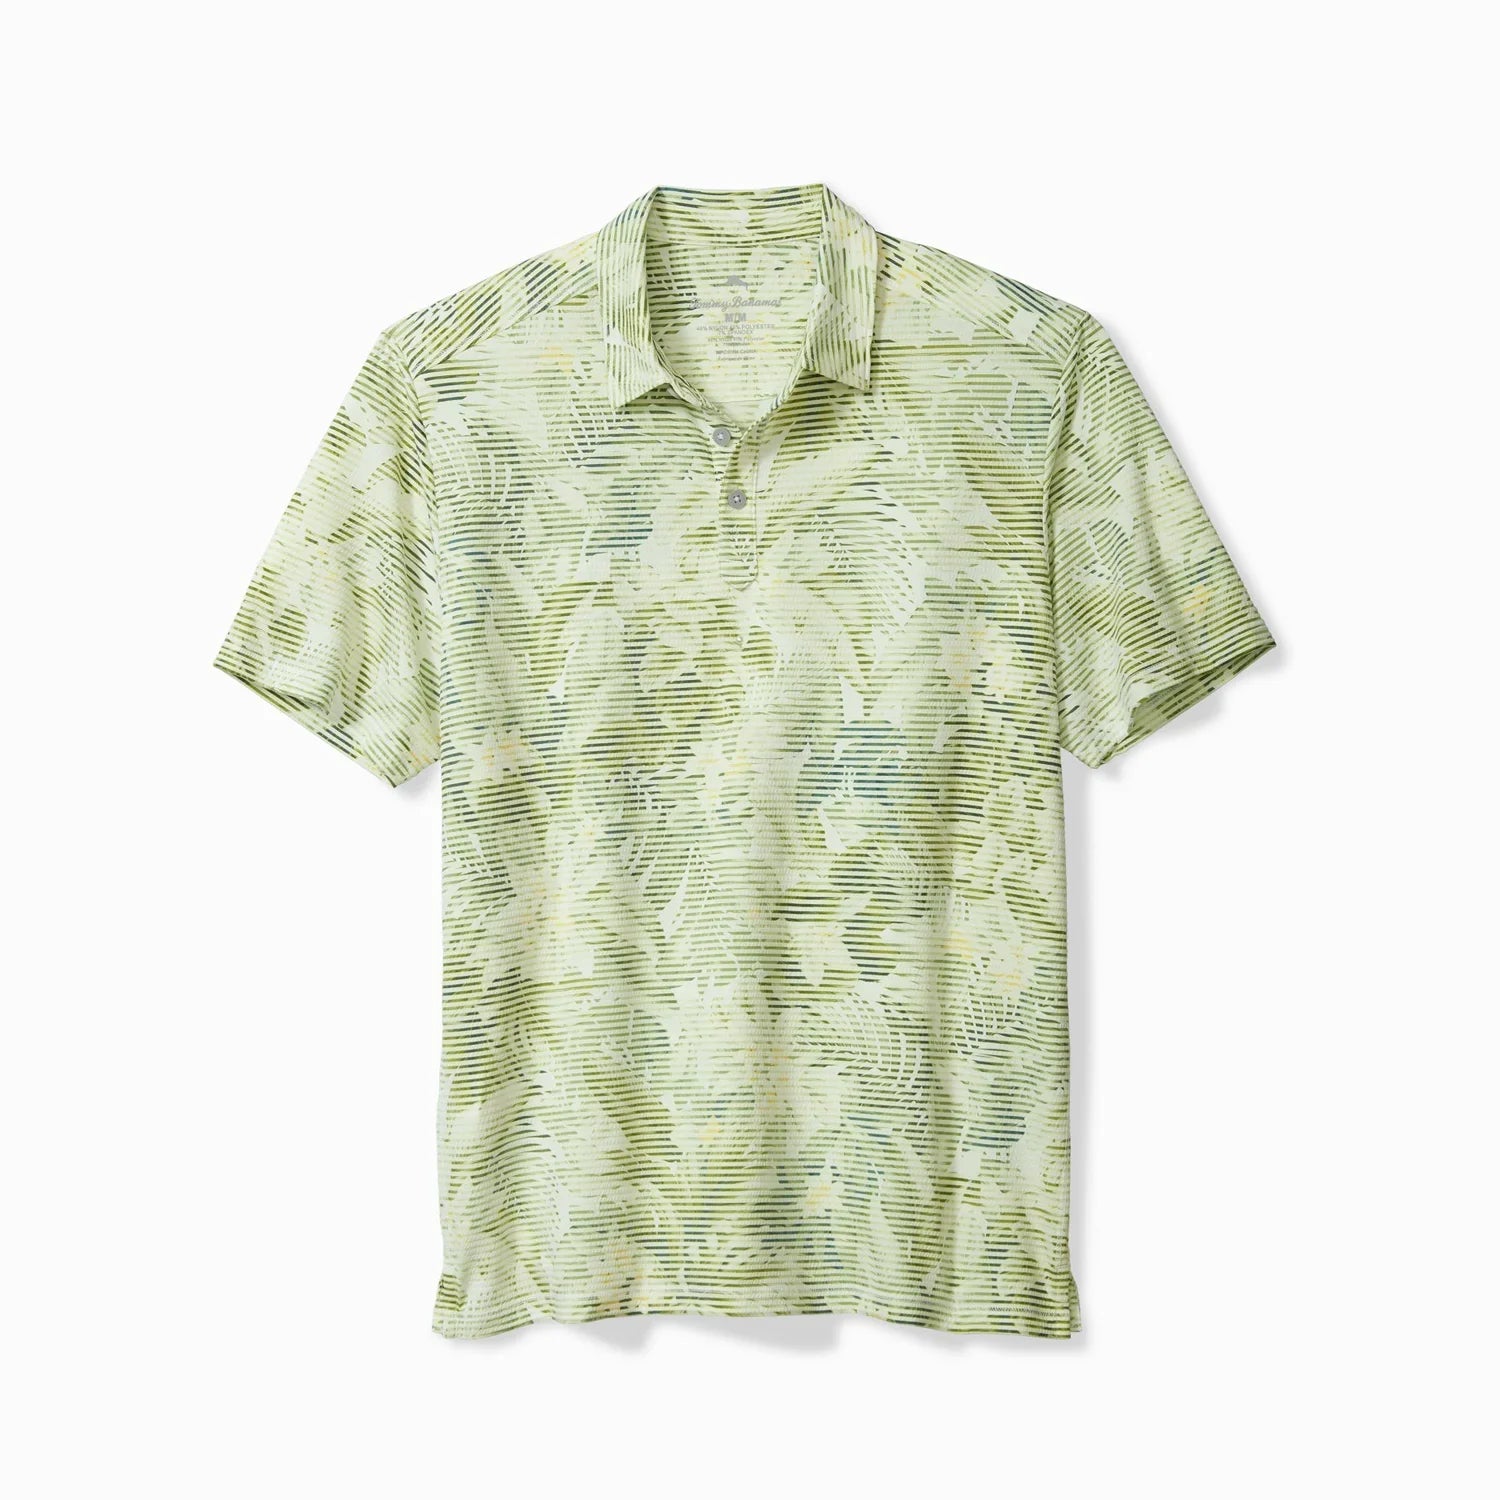 'Tommy Bahama Costa Wave Lush Lines IslandZone Polo' in 'Beach Grass' colour